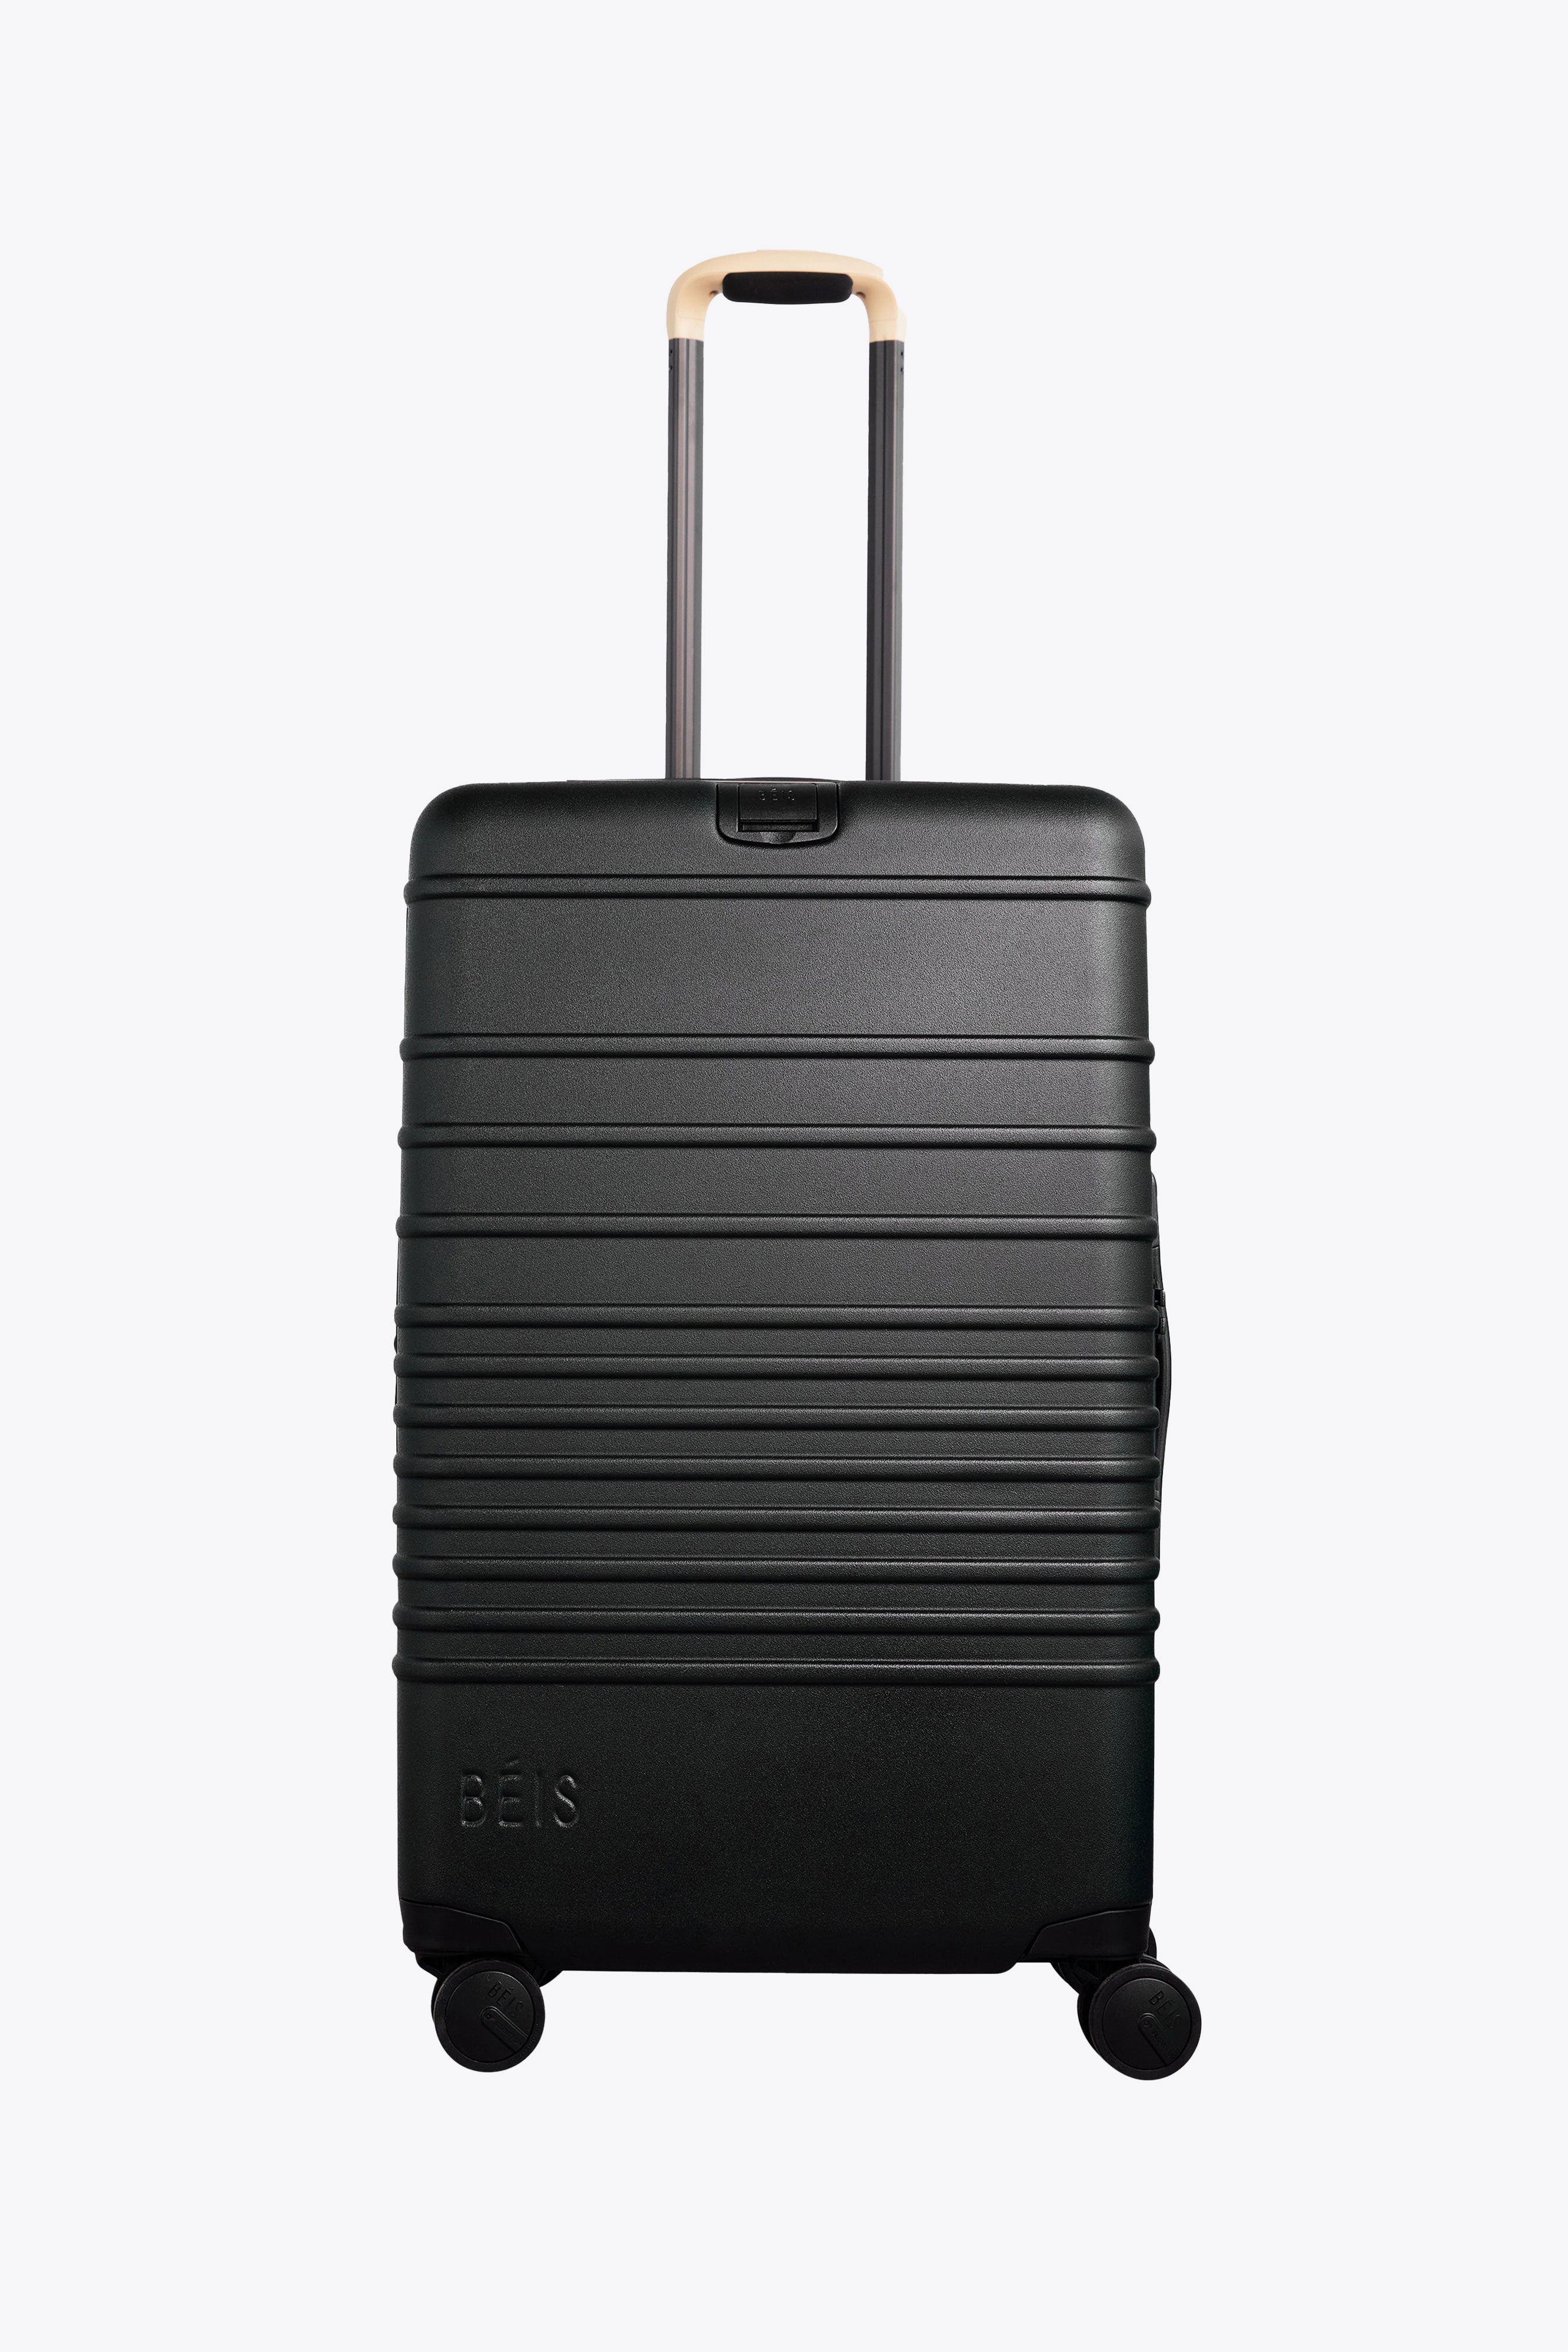 13 Best Hardside Luggage of 2023, Tested and Reviewed